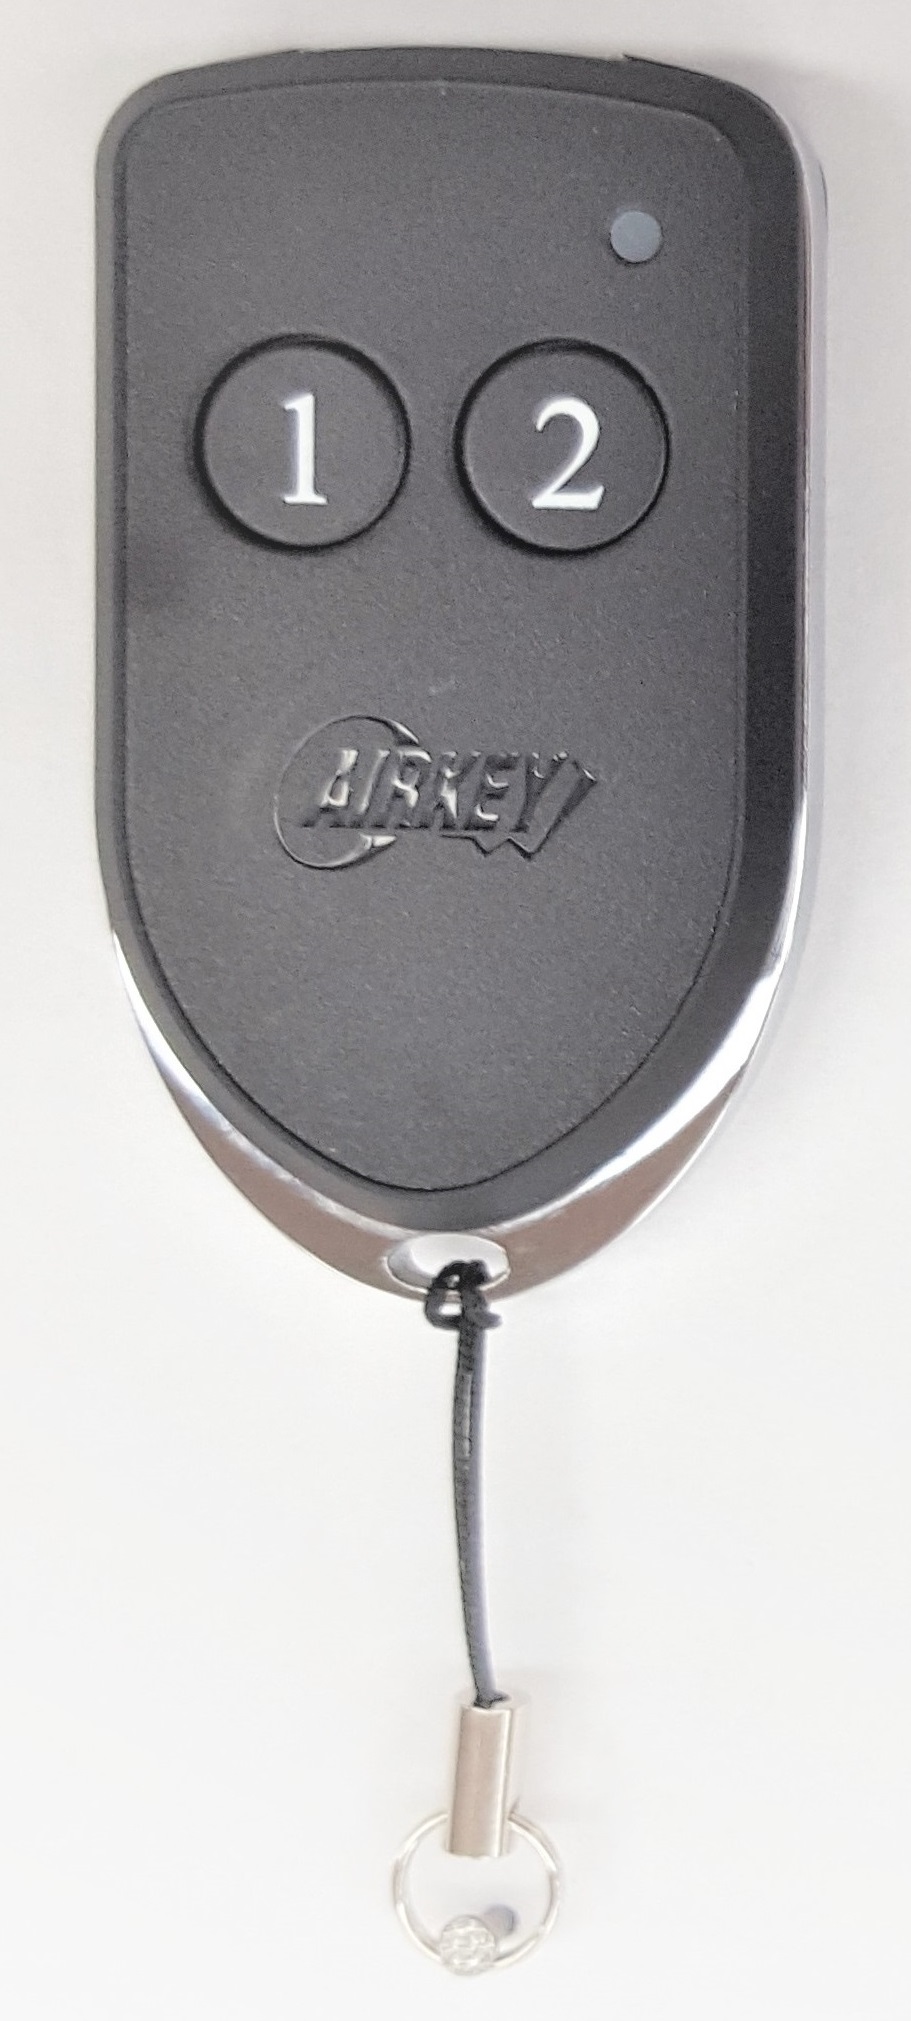 AIRKEY SERIES-4, 2 BUTTON REMOTE 34-BIT WIEGAND TRANSMITTER 433.92MHz IP65 BLACK WITH SILVER TRIM WITH BLACK KEYS 1/2 ROLLING CODE ENCRYPTION